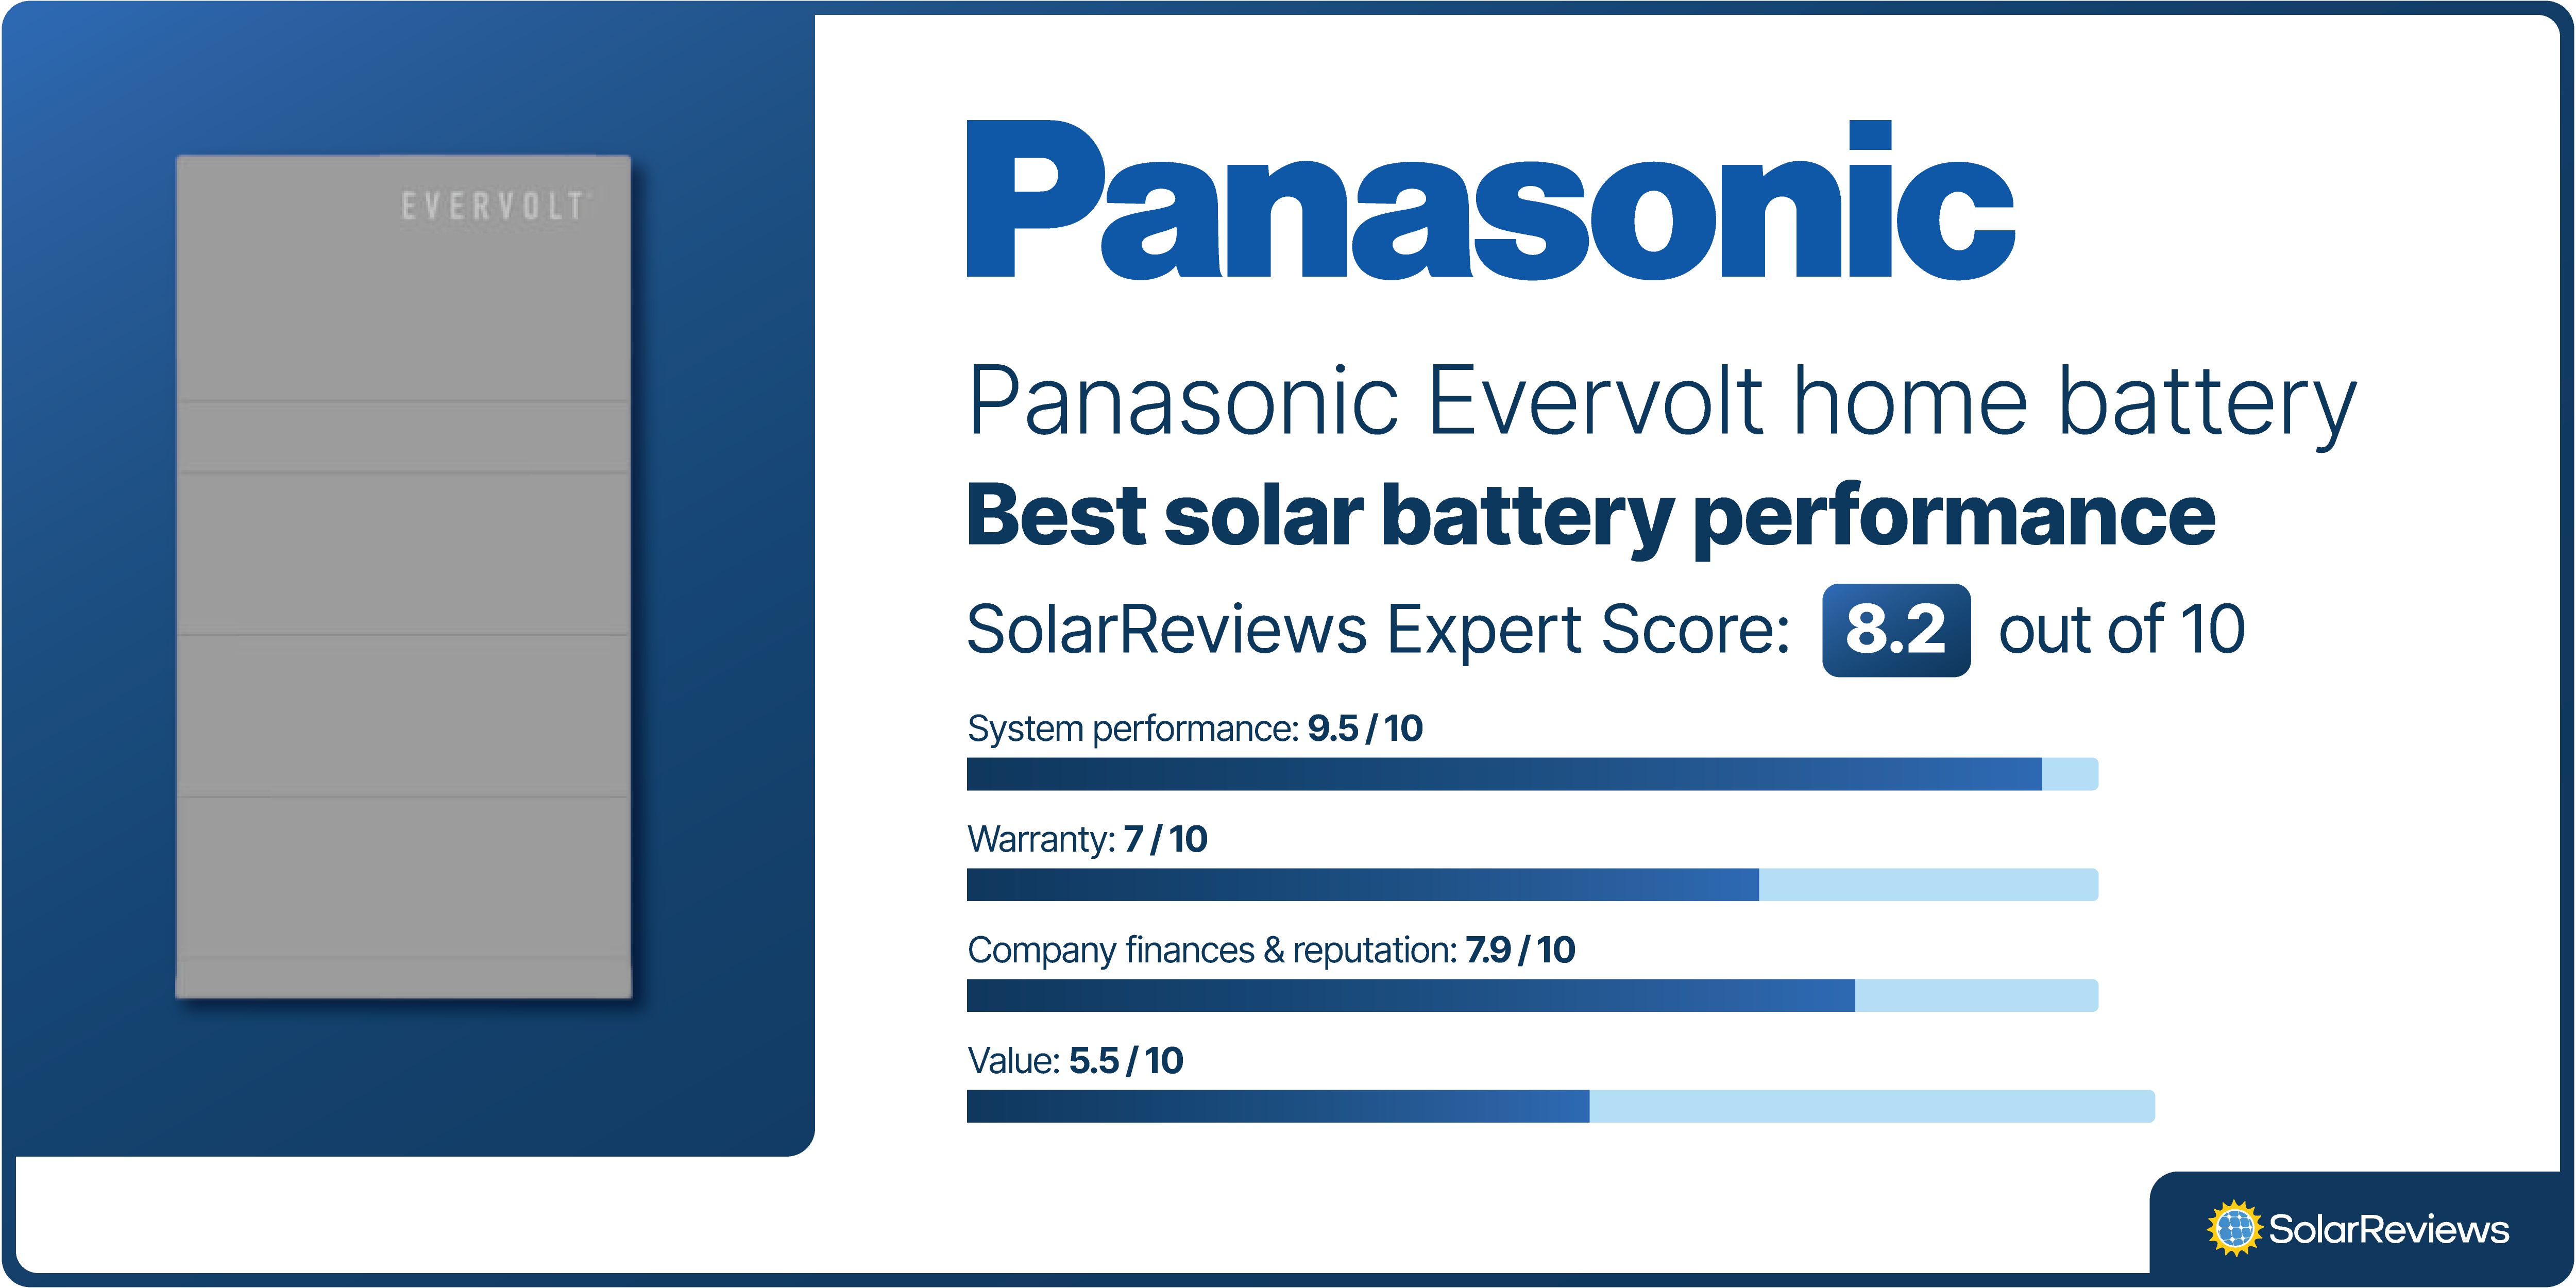 The Panasonic Evervolt Home Battery was voted best solar battery performance, with a SolarReviews Expert Score of 8.2/10, scoring highest in system performance, company finance and reputation, and warranty.